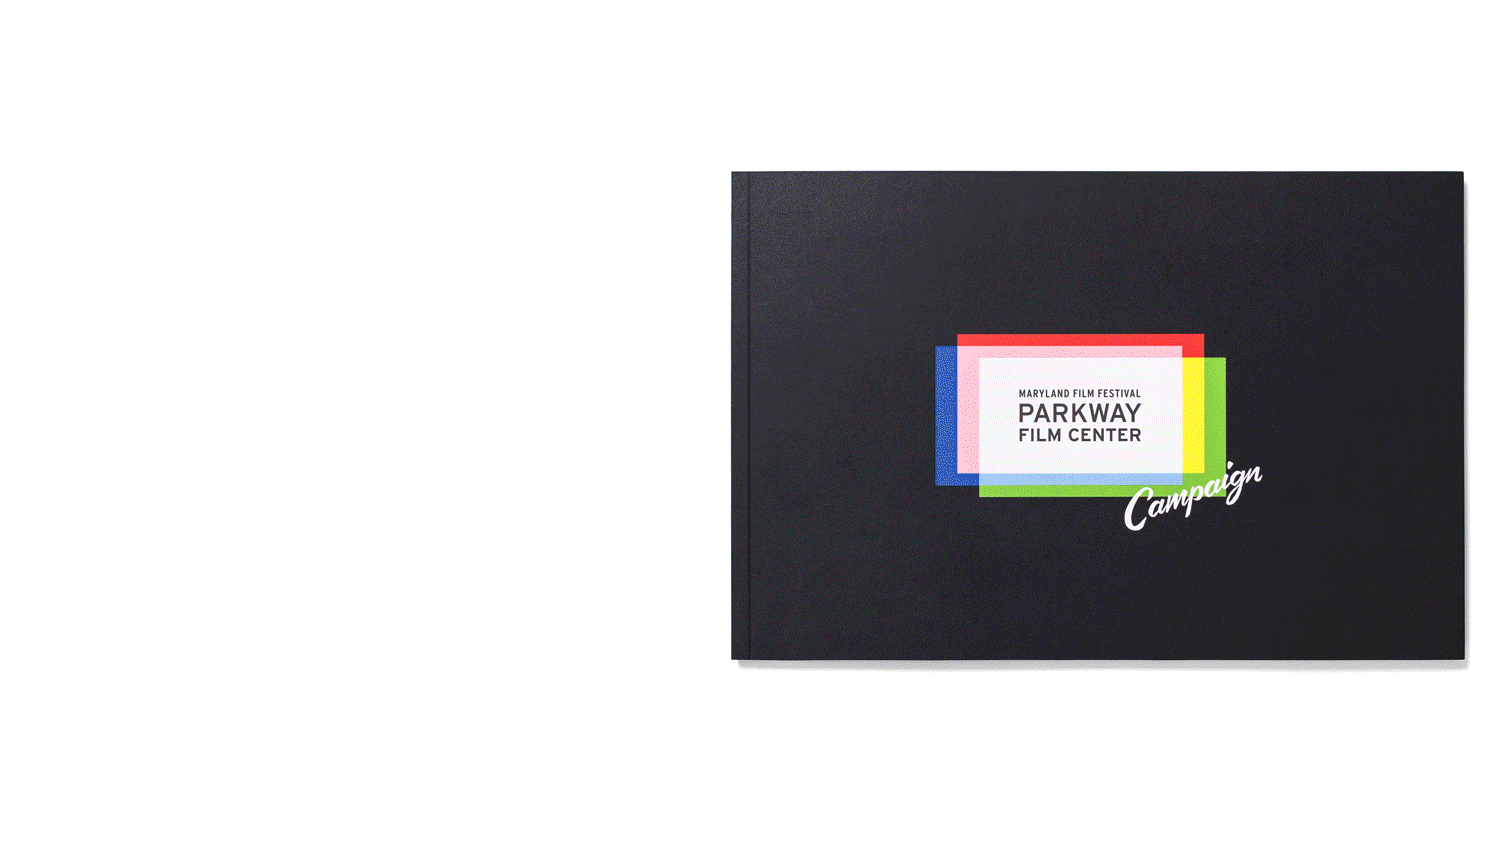 Design of the Campaign for the Parkway Film Center case-statement, fundraising book